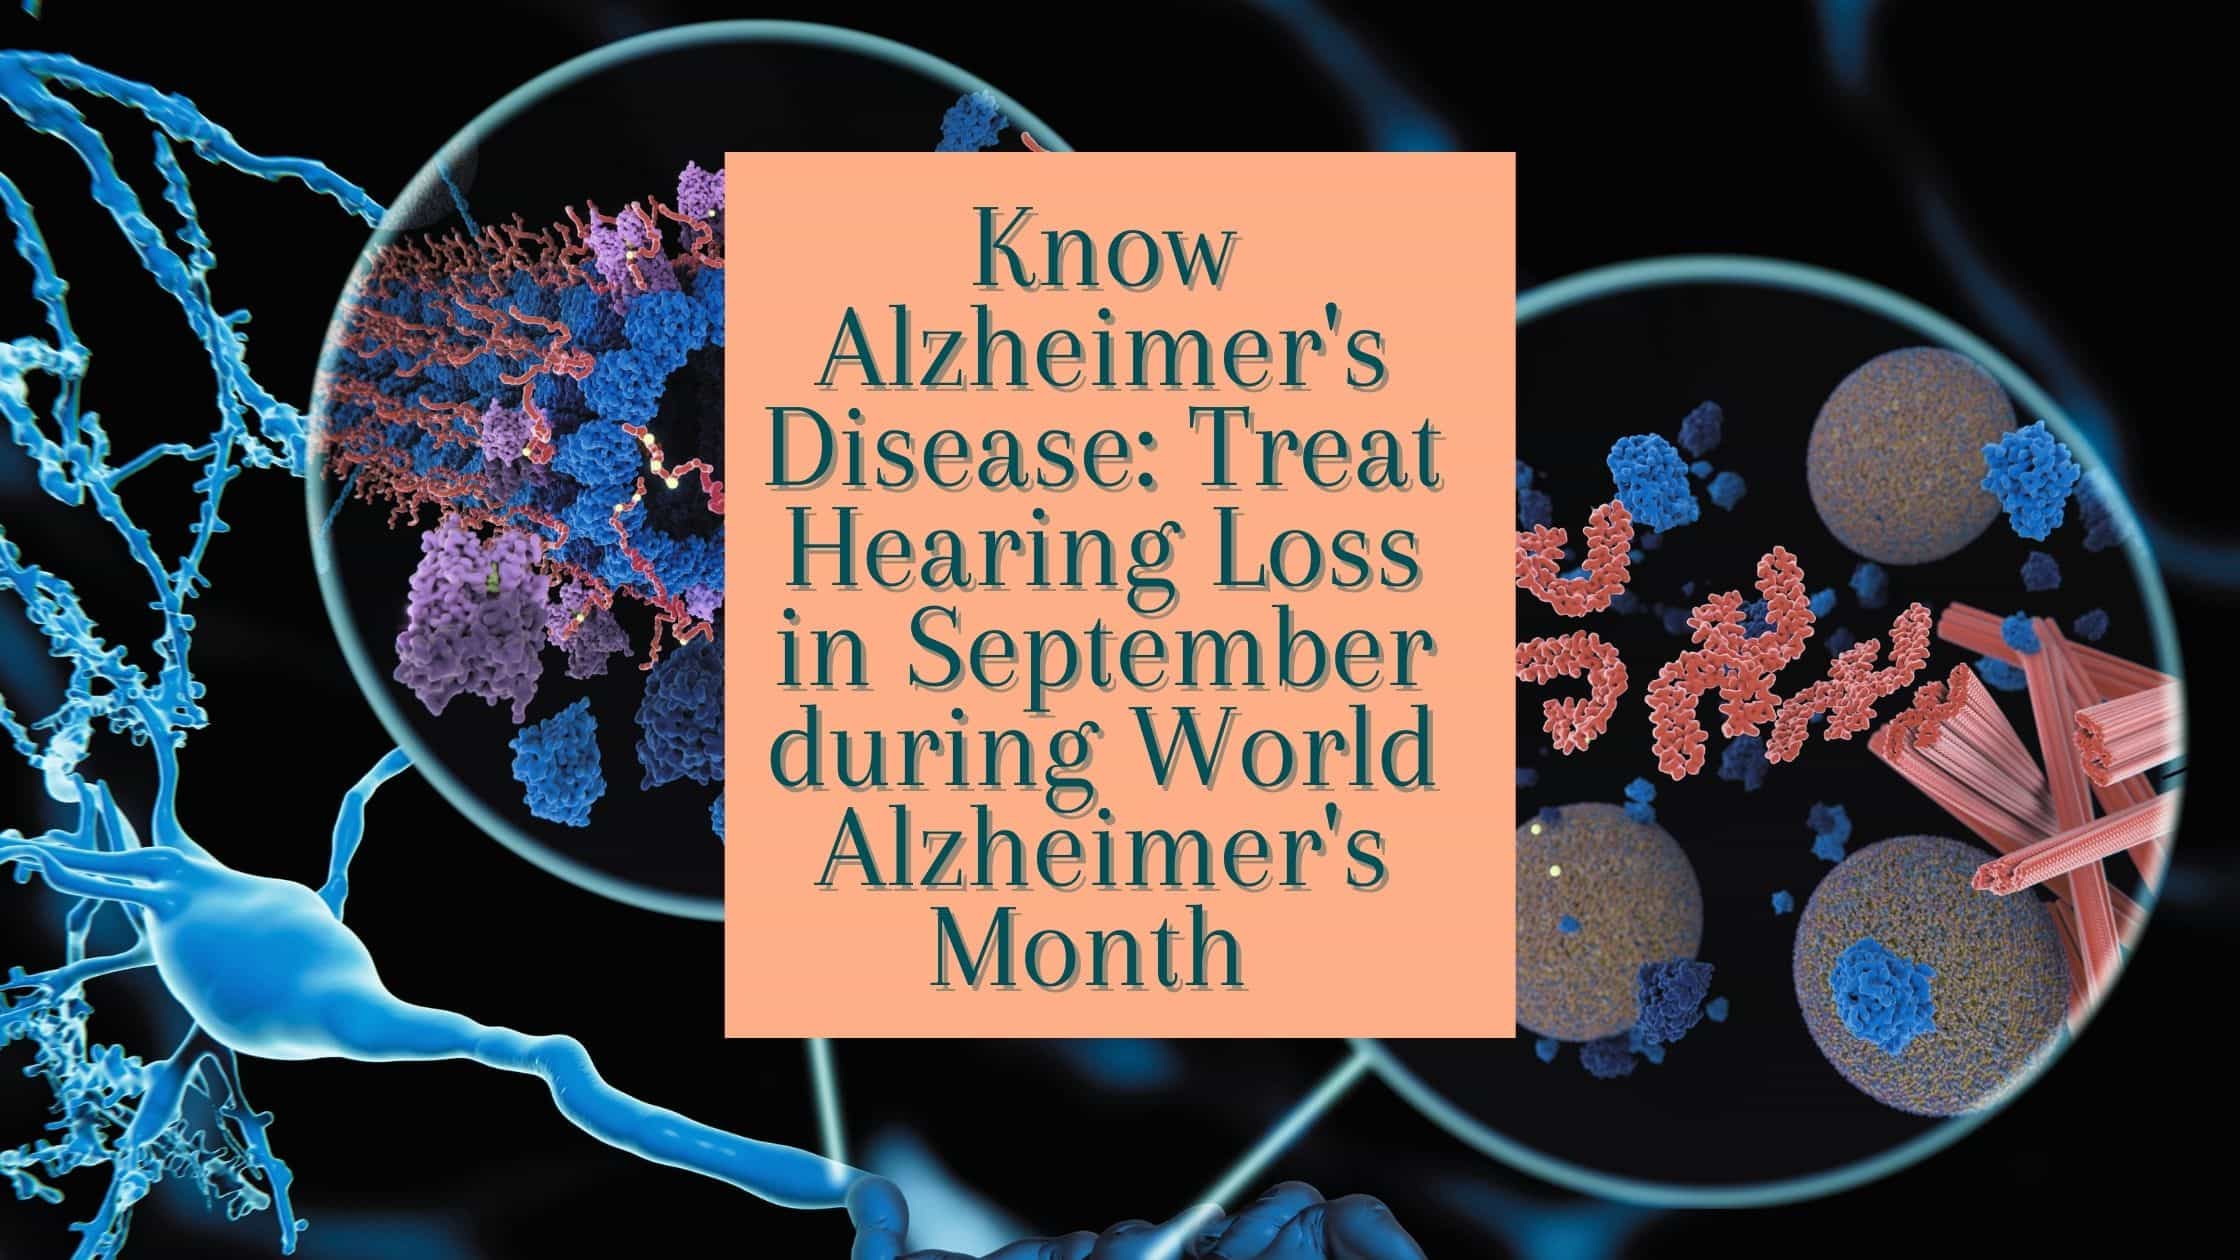 Know Alzheimers Disease: Treat Hearing Loss